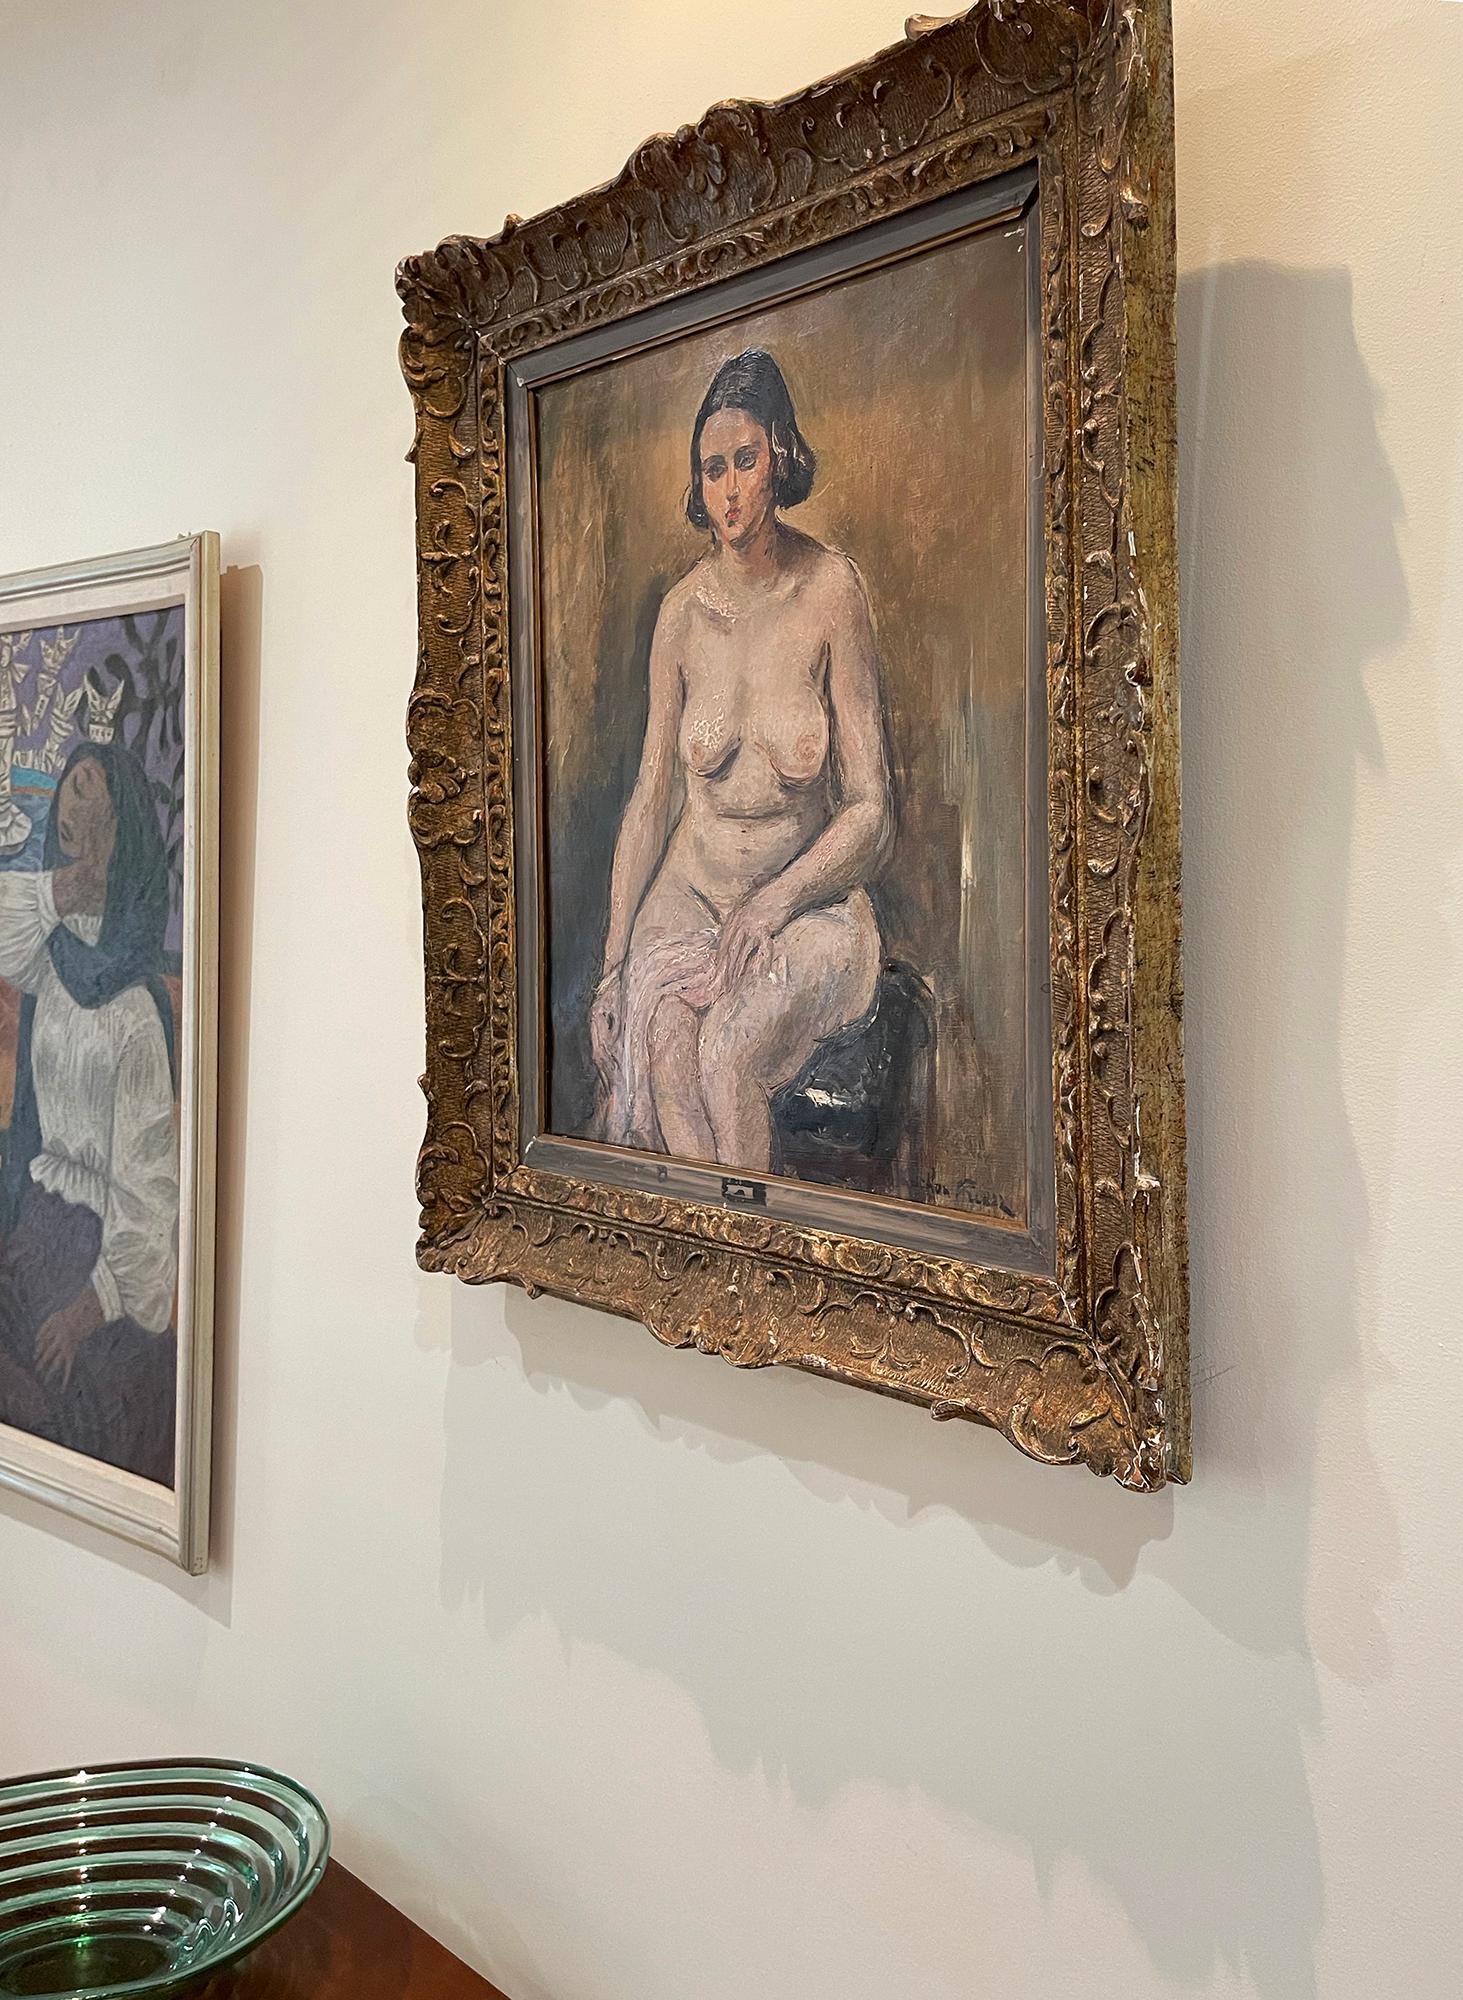 In a formal setting, Othon Friesz presents an introspective sitting nude with eyes glancing to the side .  It's rendered in a loose post-impressionist style with soft earthy browns, ochres, and warm grays that reveal the quiet nature of the subject.